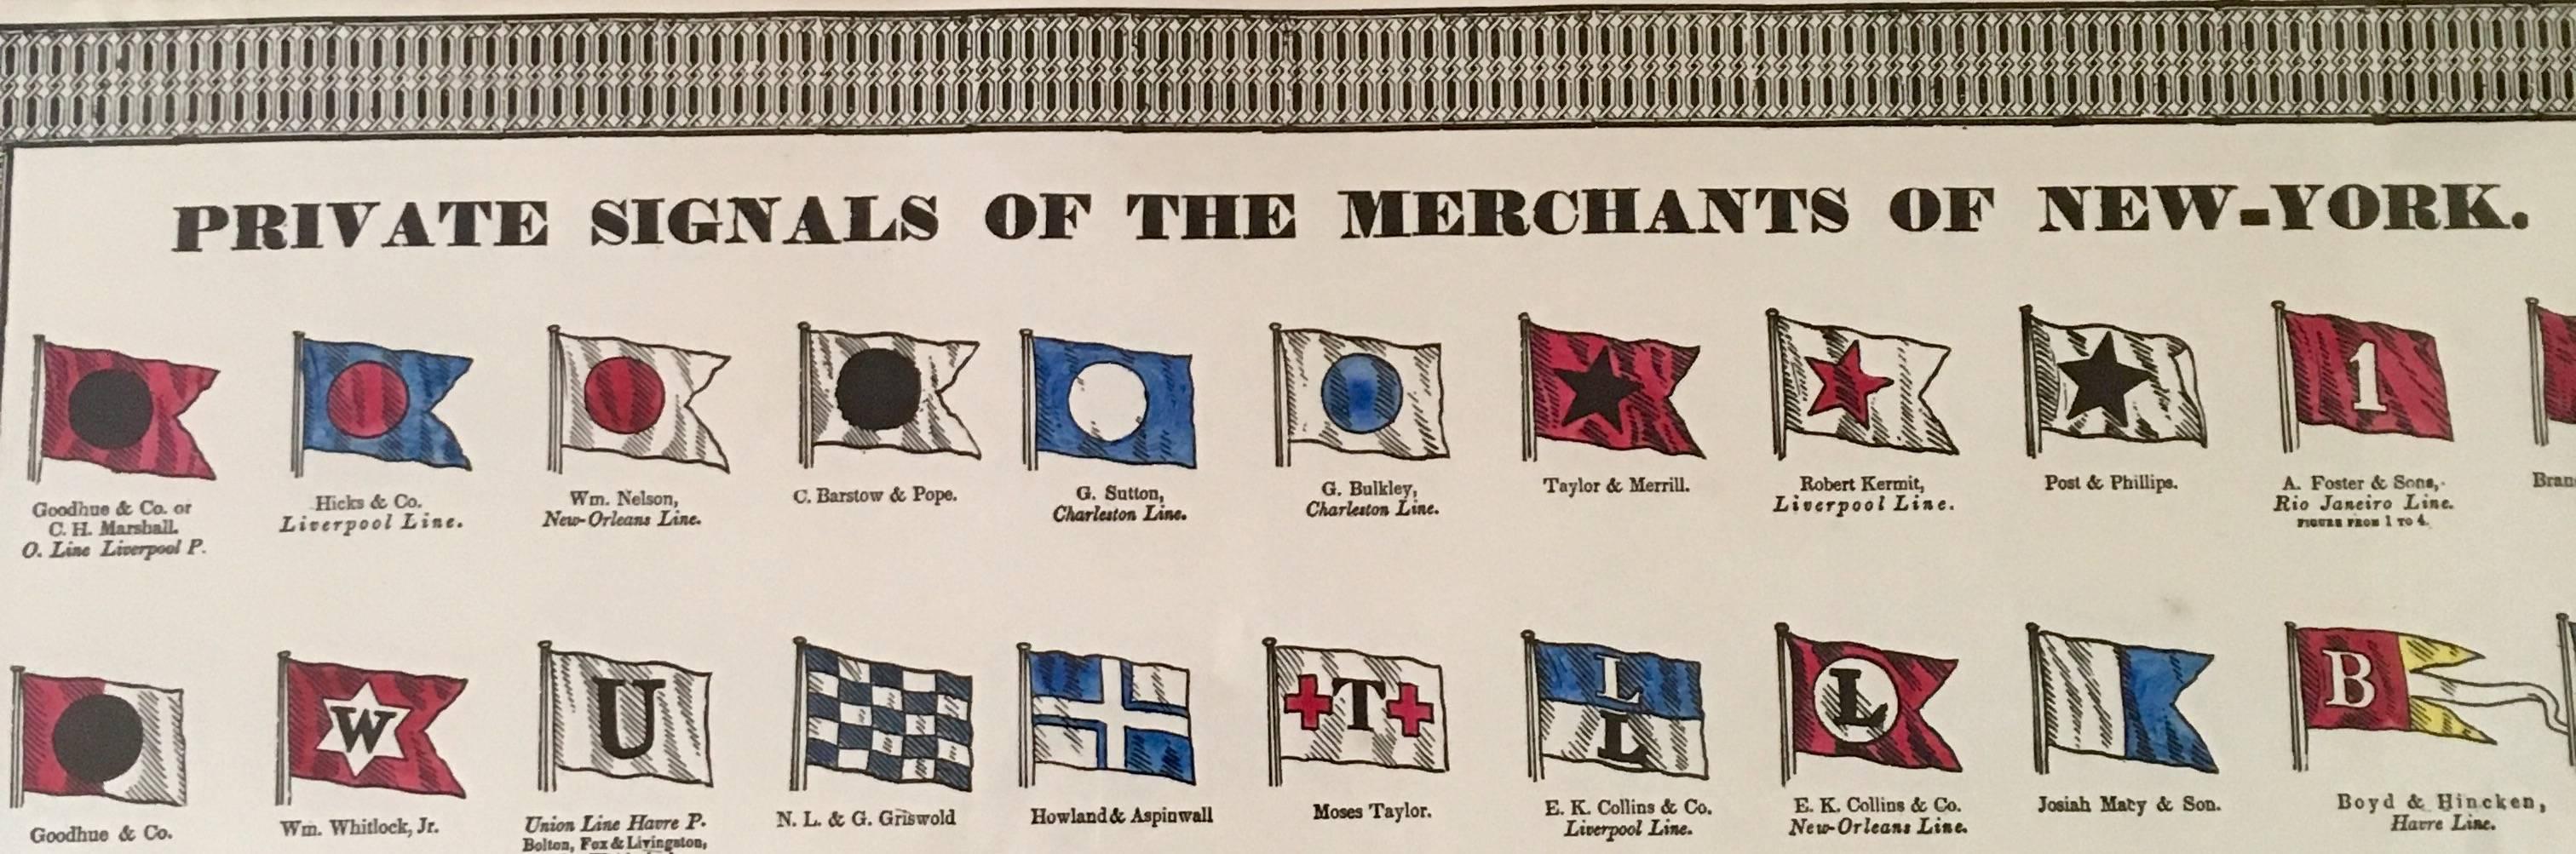 Lithograph, Private Signals of the Merchants of New York, a colored print on paper display of various House Flags flown on New York clipper ships in the 19th century, within a gadroon style border, inscribed lower right 